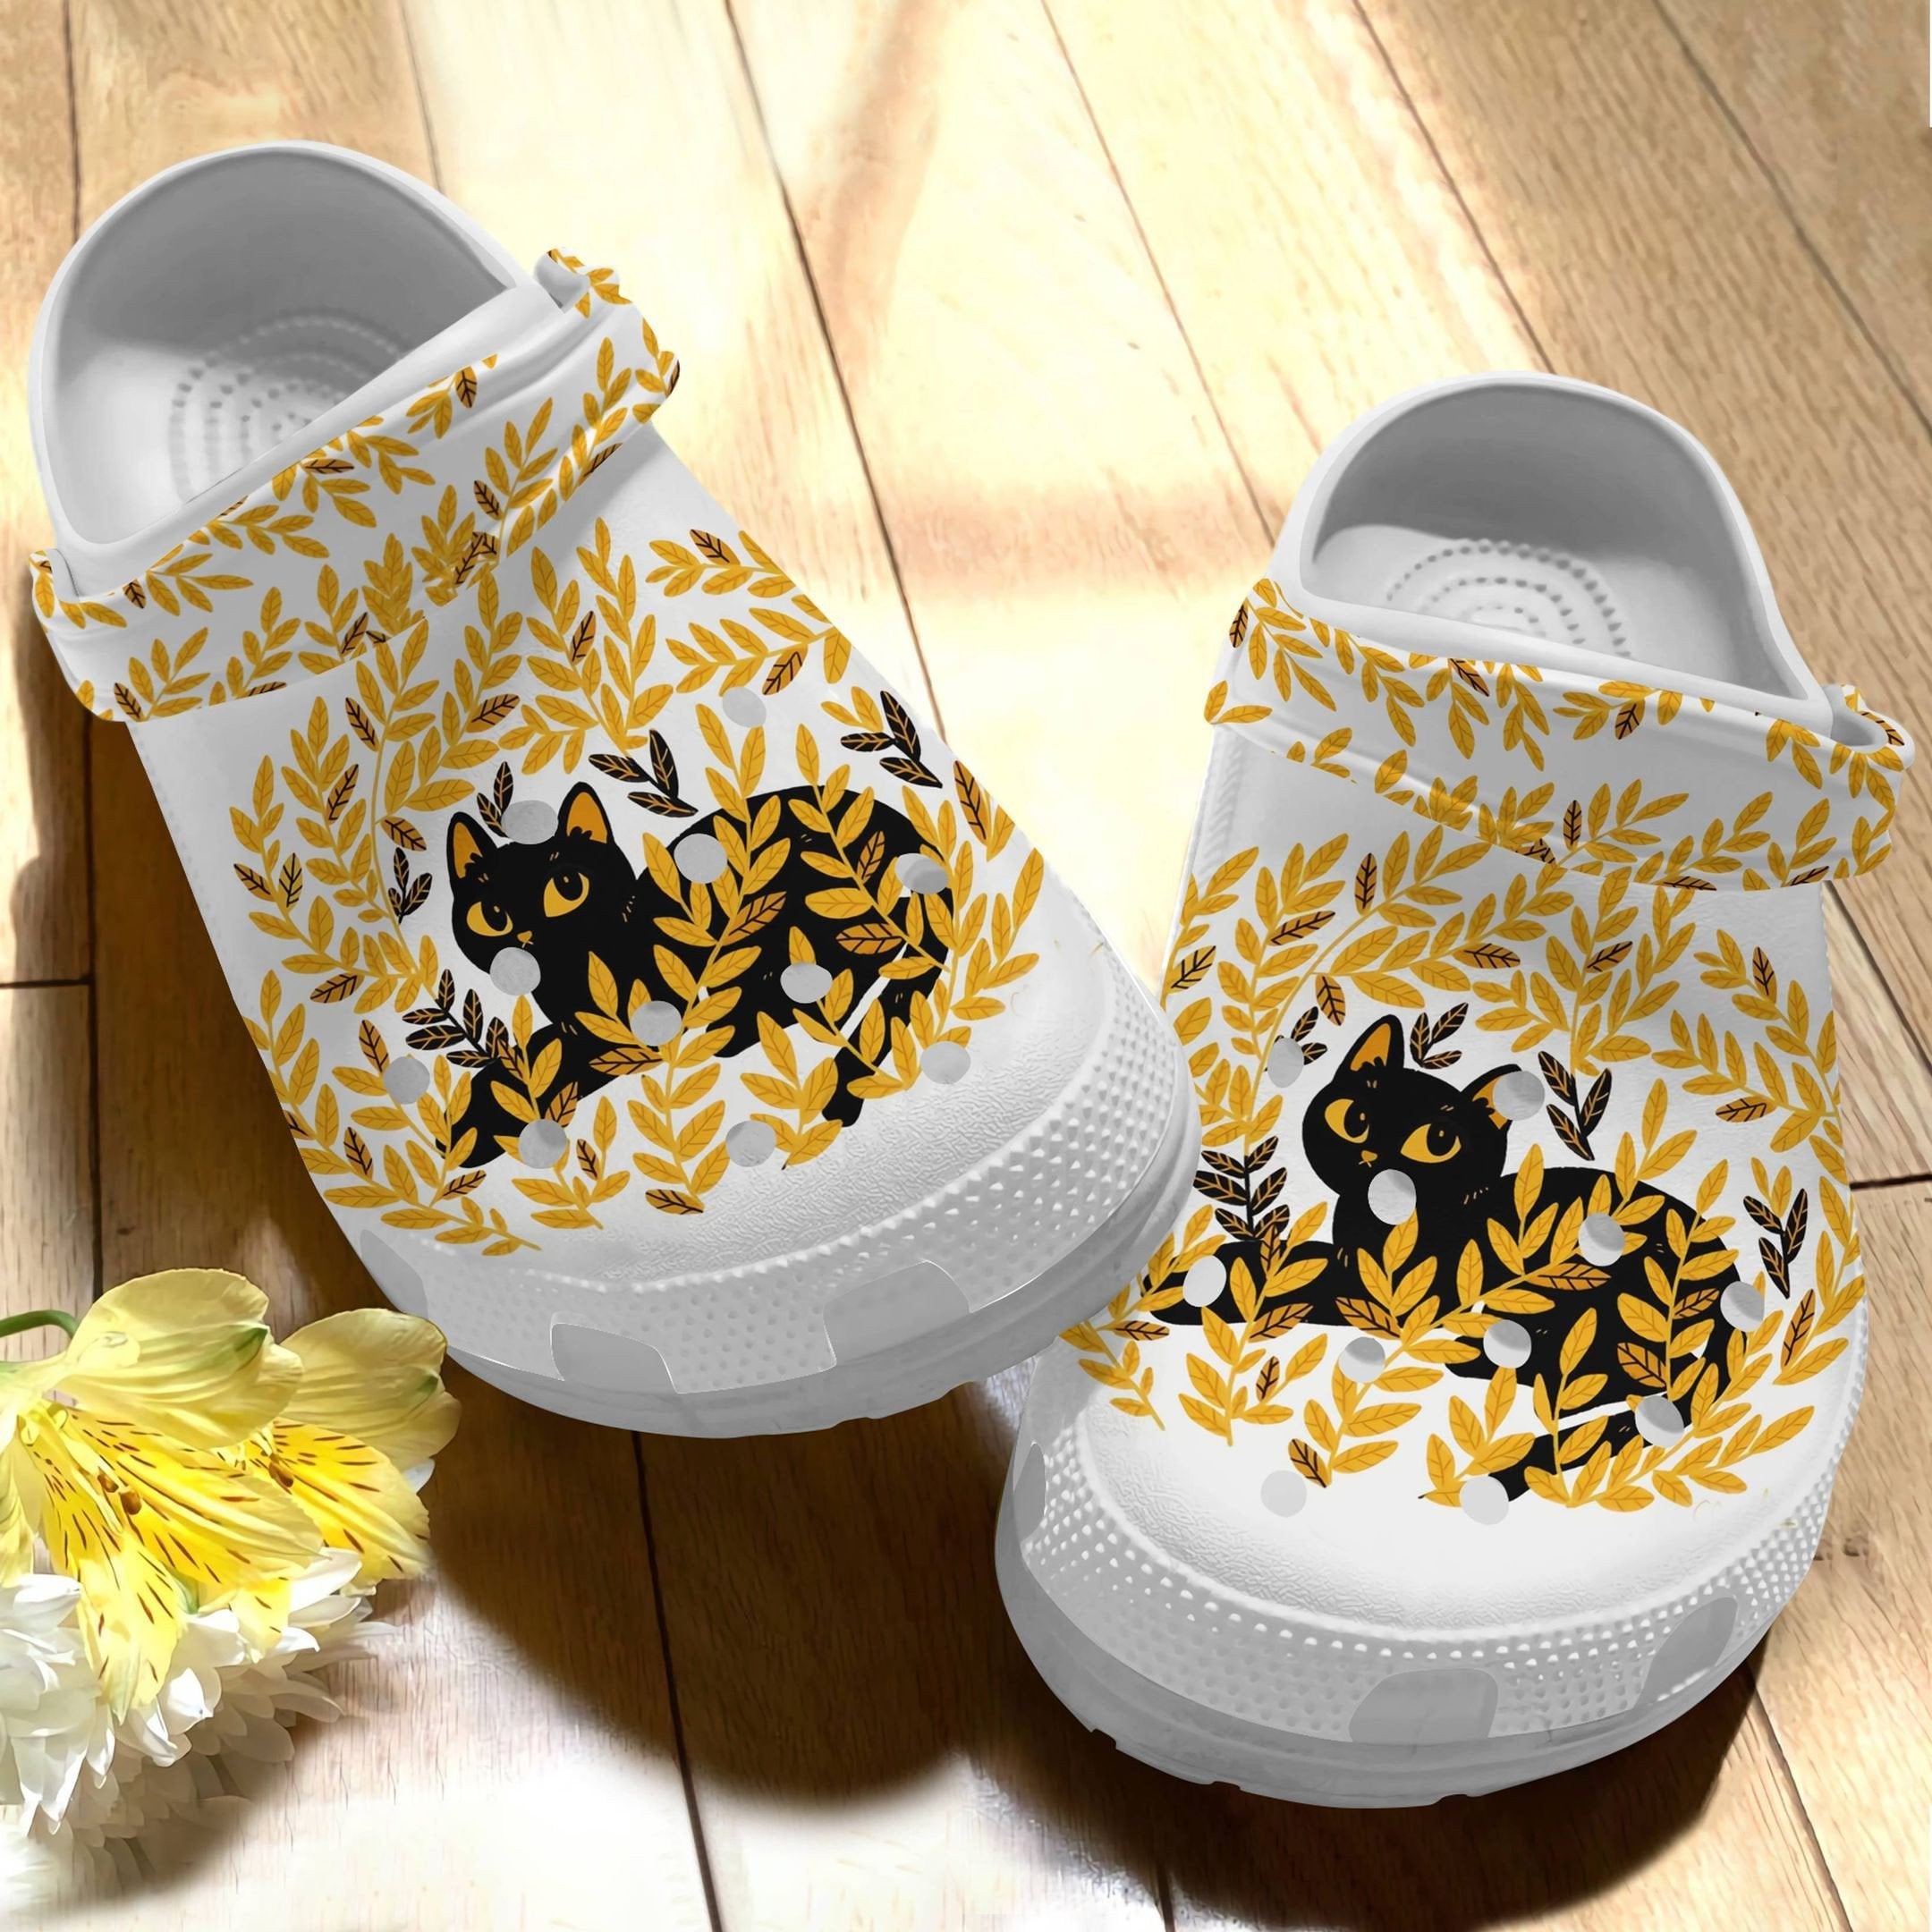 Autumn Black Cat Among The Weeds Shoes - Funny Animal Crocs Clog Birthday Gift